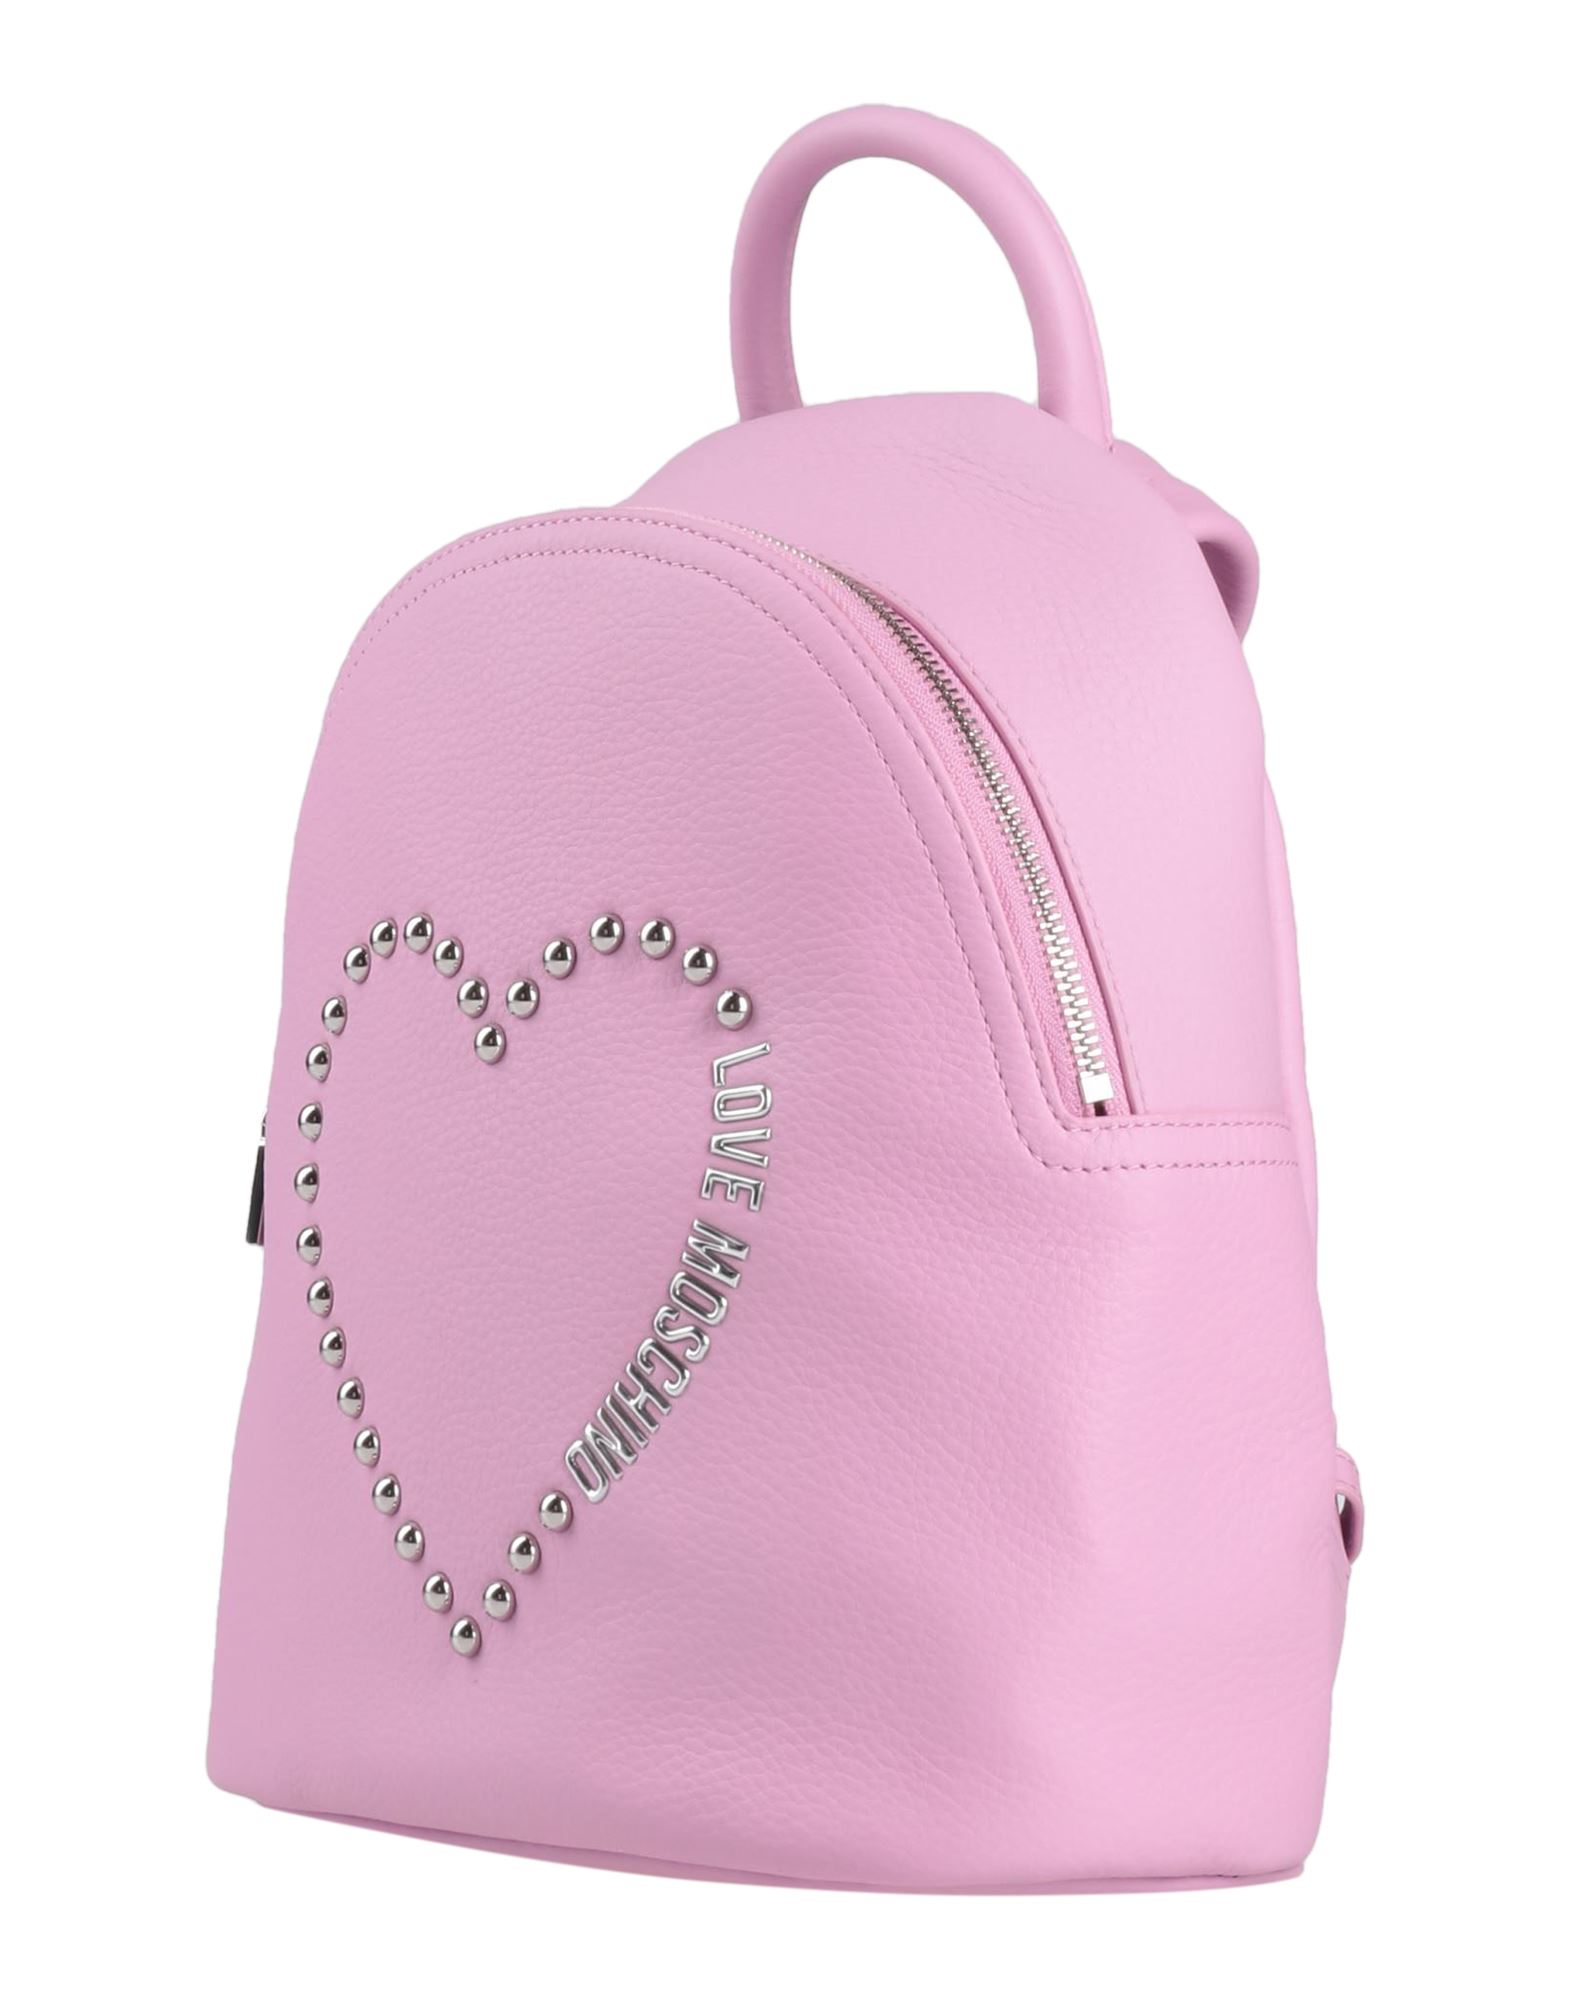 Love Moschino Backpacks In Pink